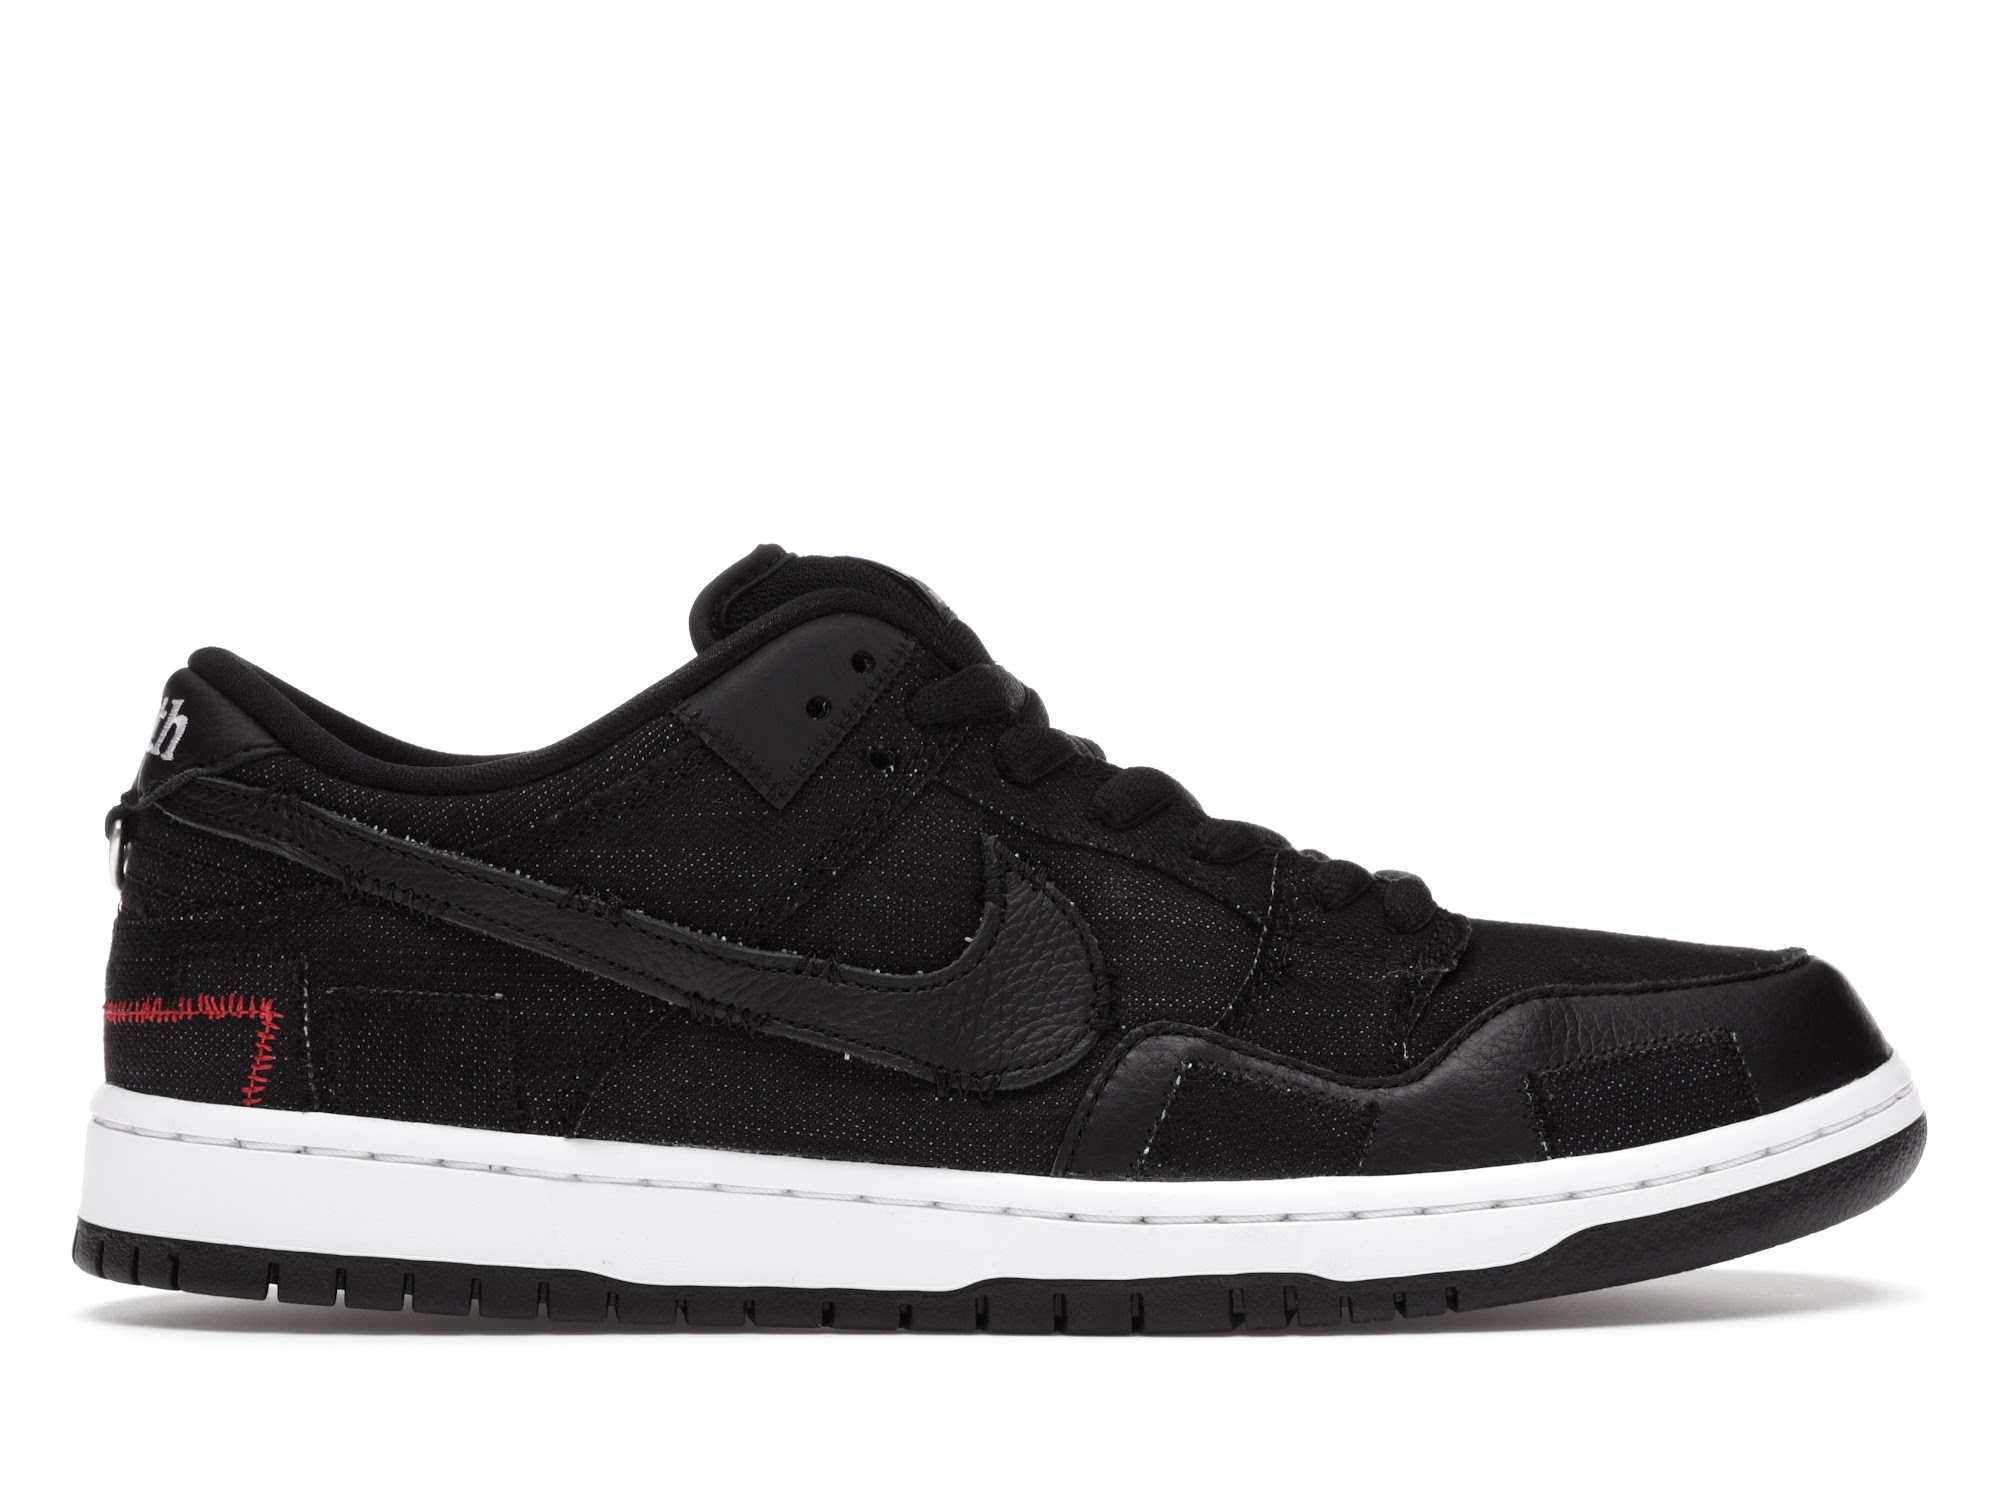 WASTED YOUTH × NIKE SB DUNK SPECIAL BOX付属品元箱梱包紙シューレース